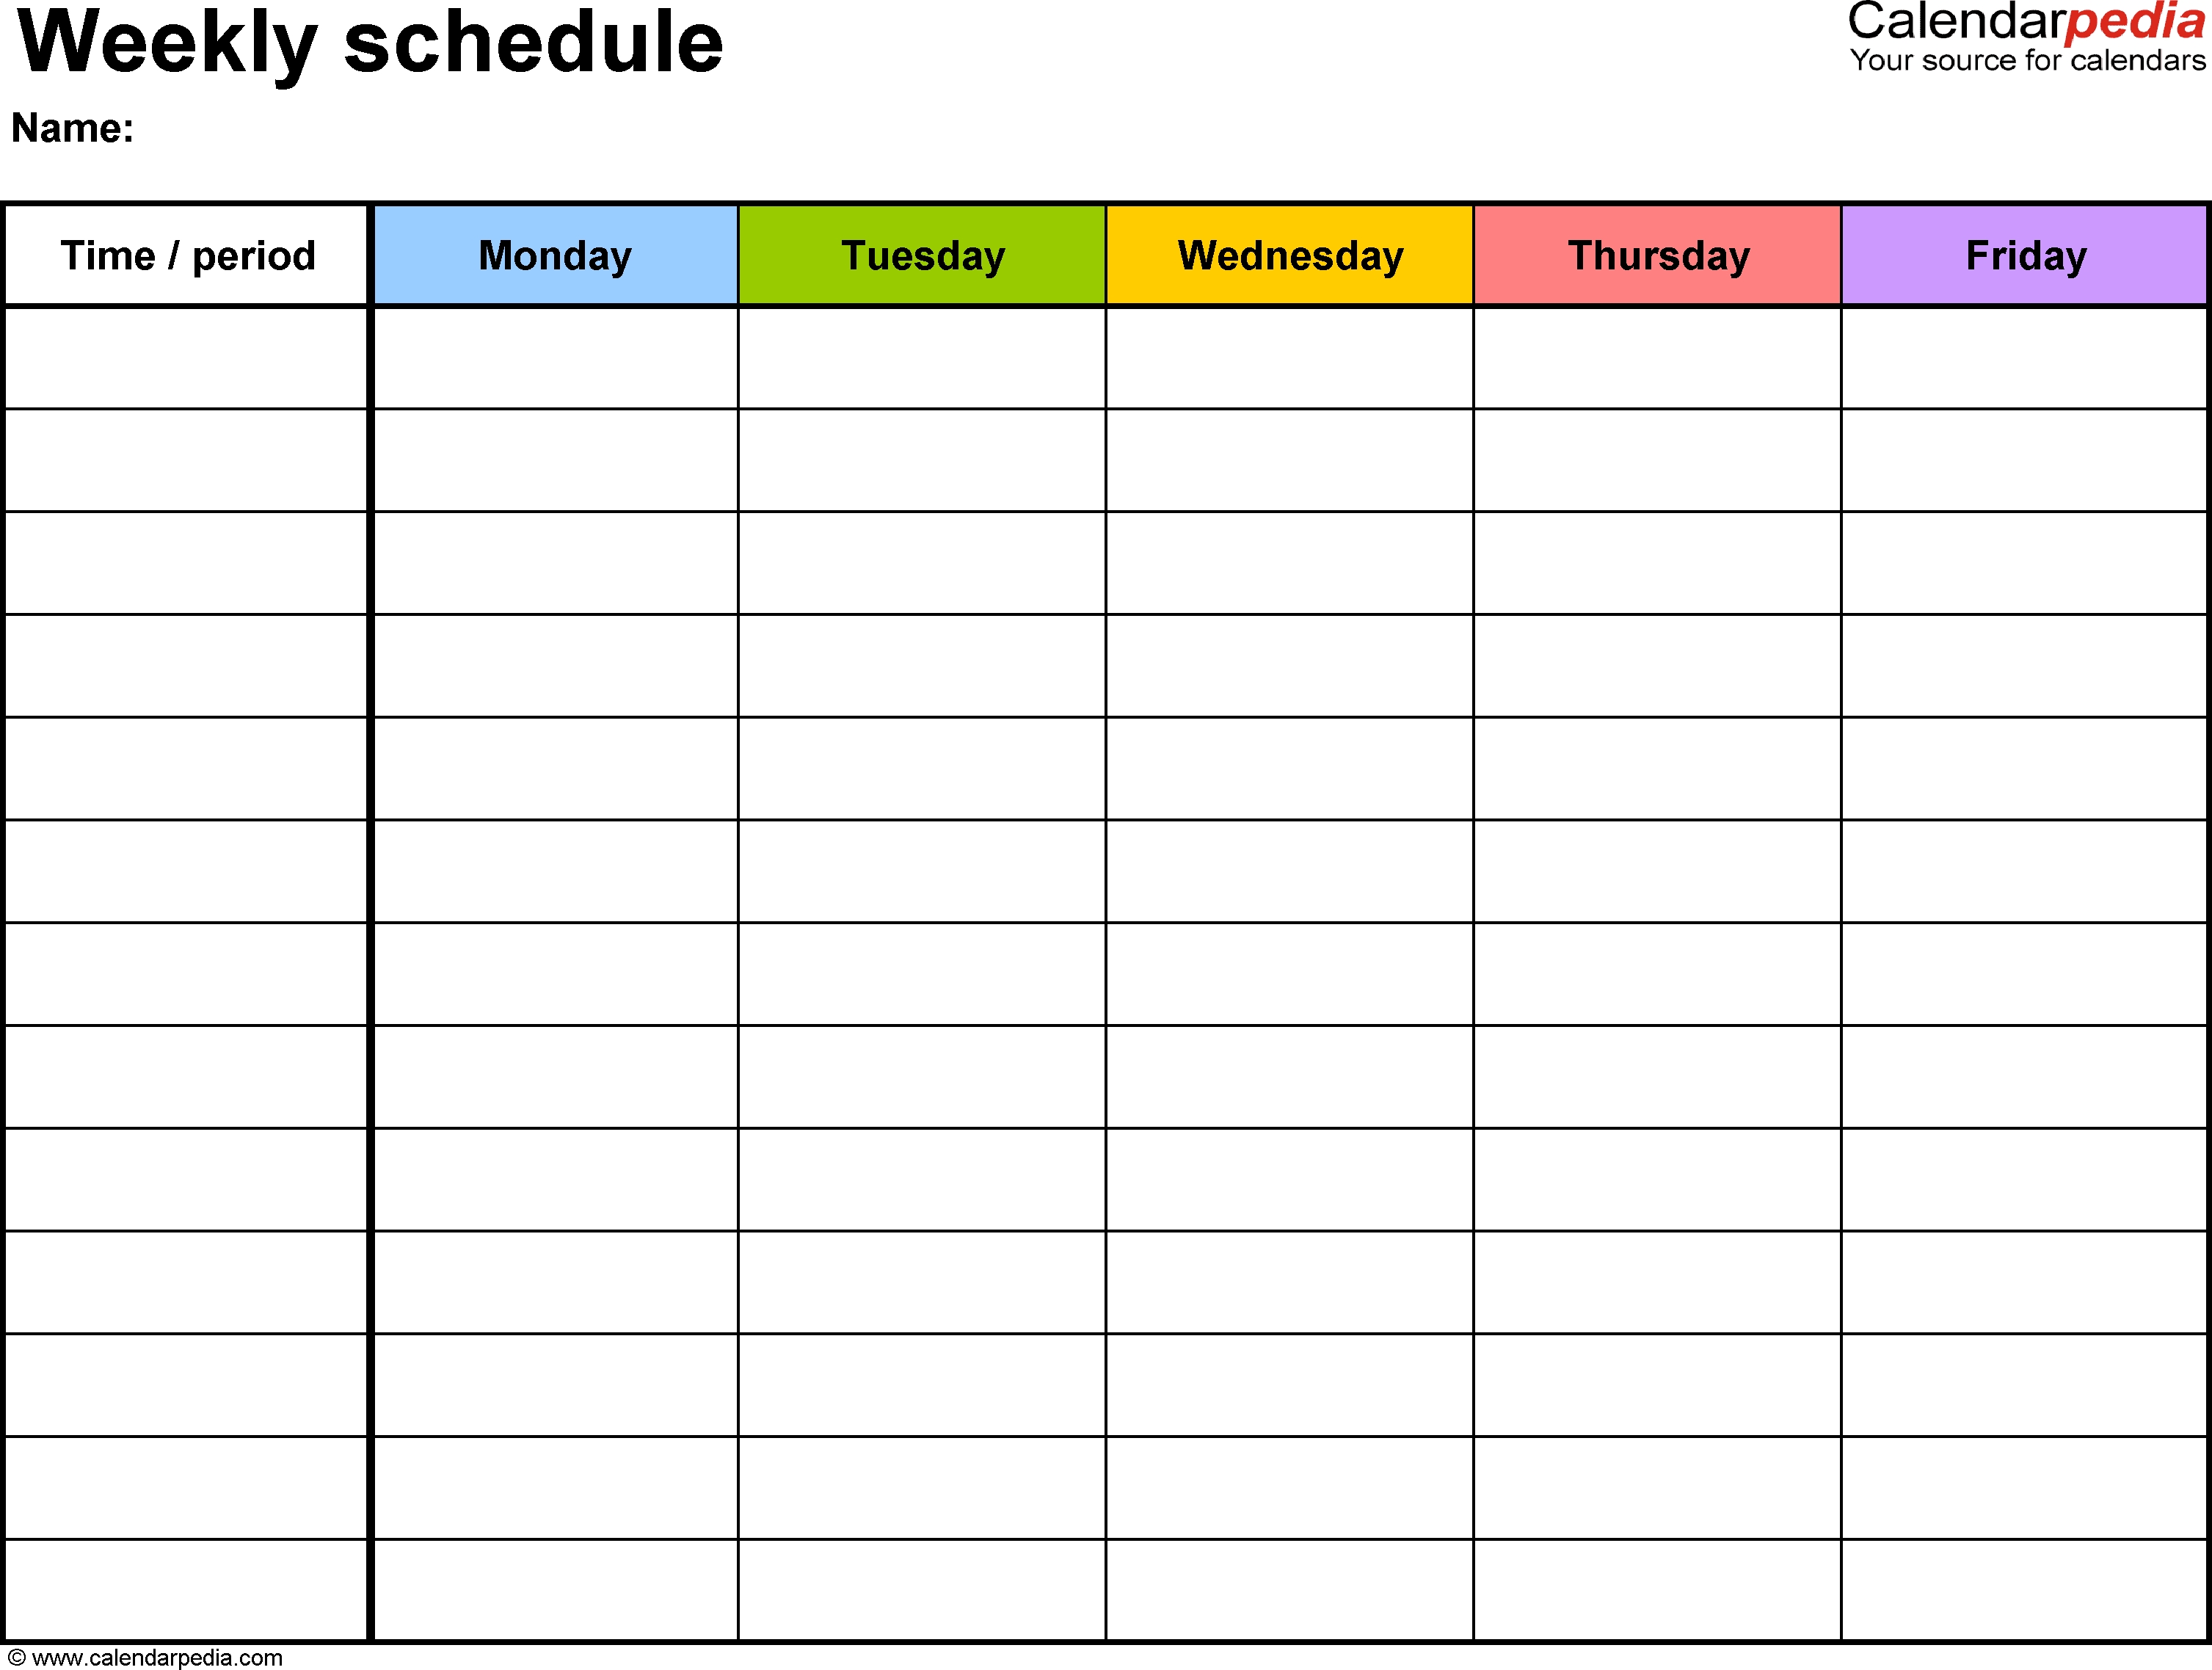 Free Weekly Schedule Templates For Word - 18 Templates Monday Friday Calendar Template Printable